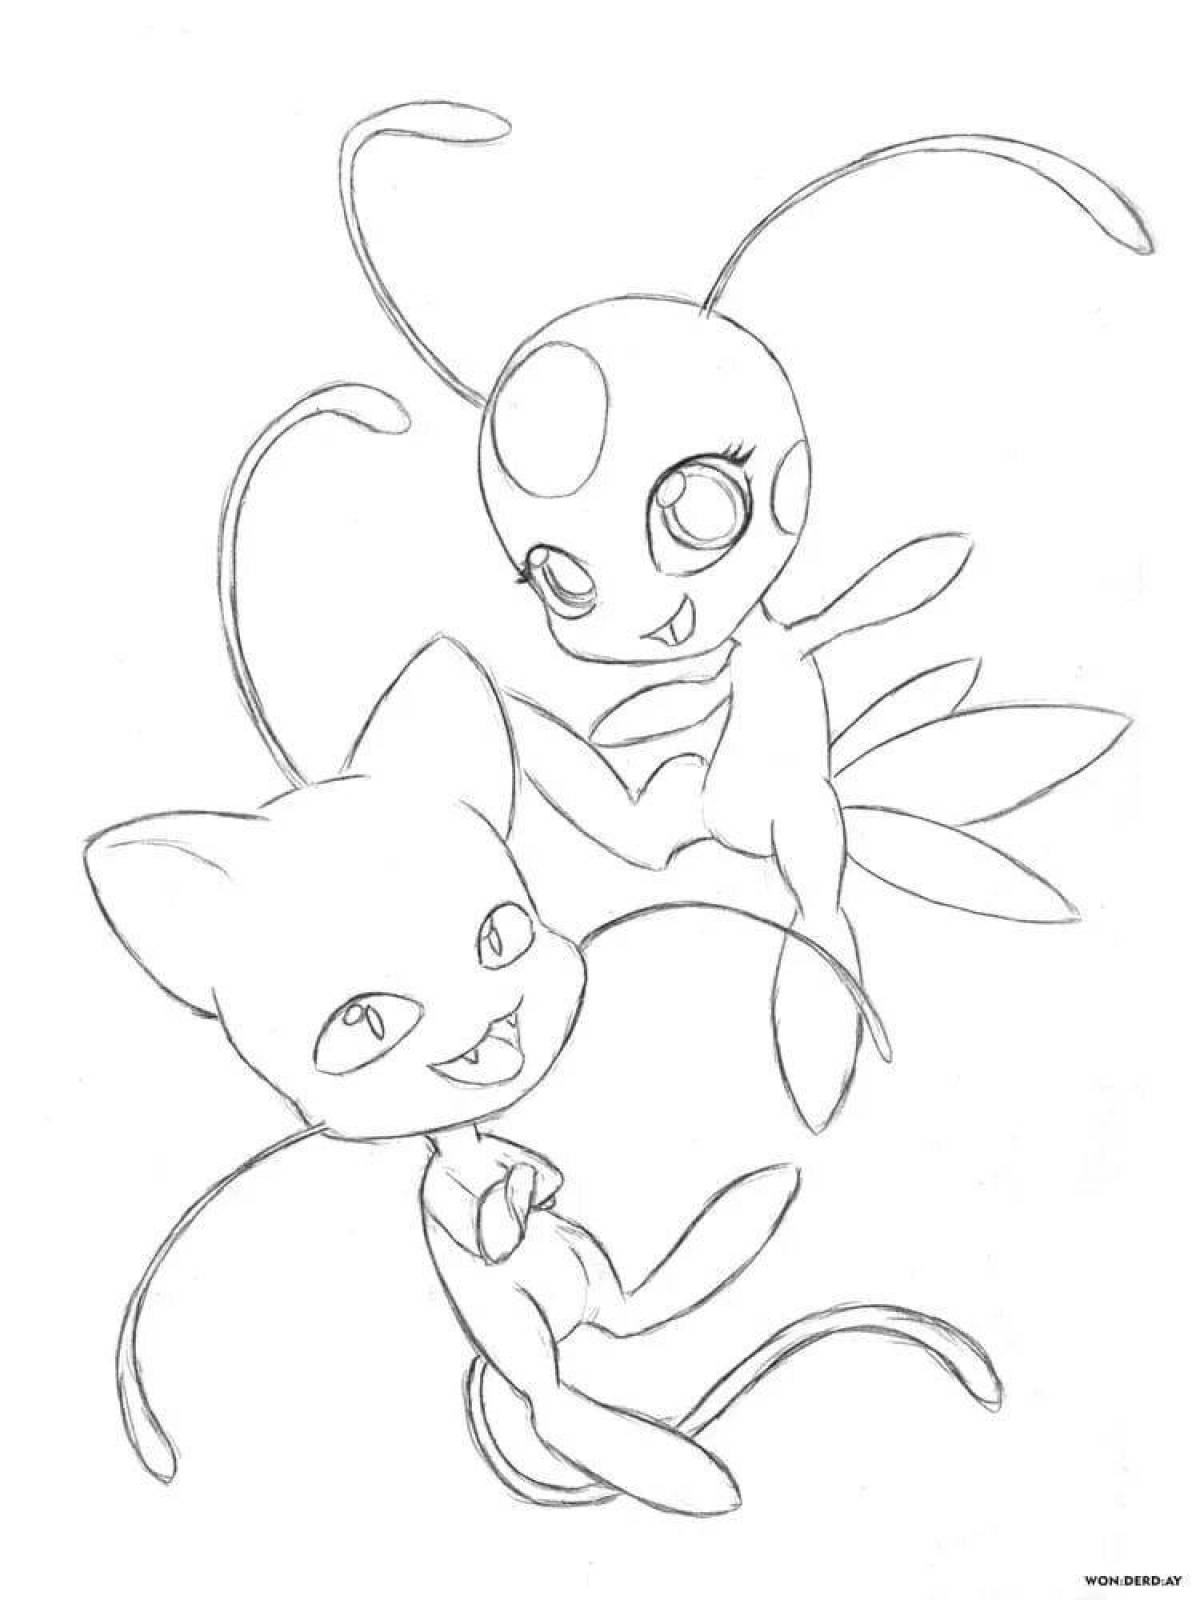 Lady bug and super cat tikki and plugg #3